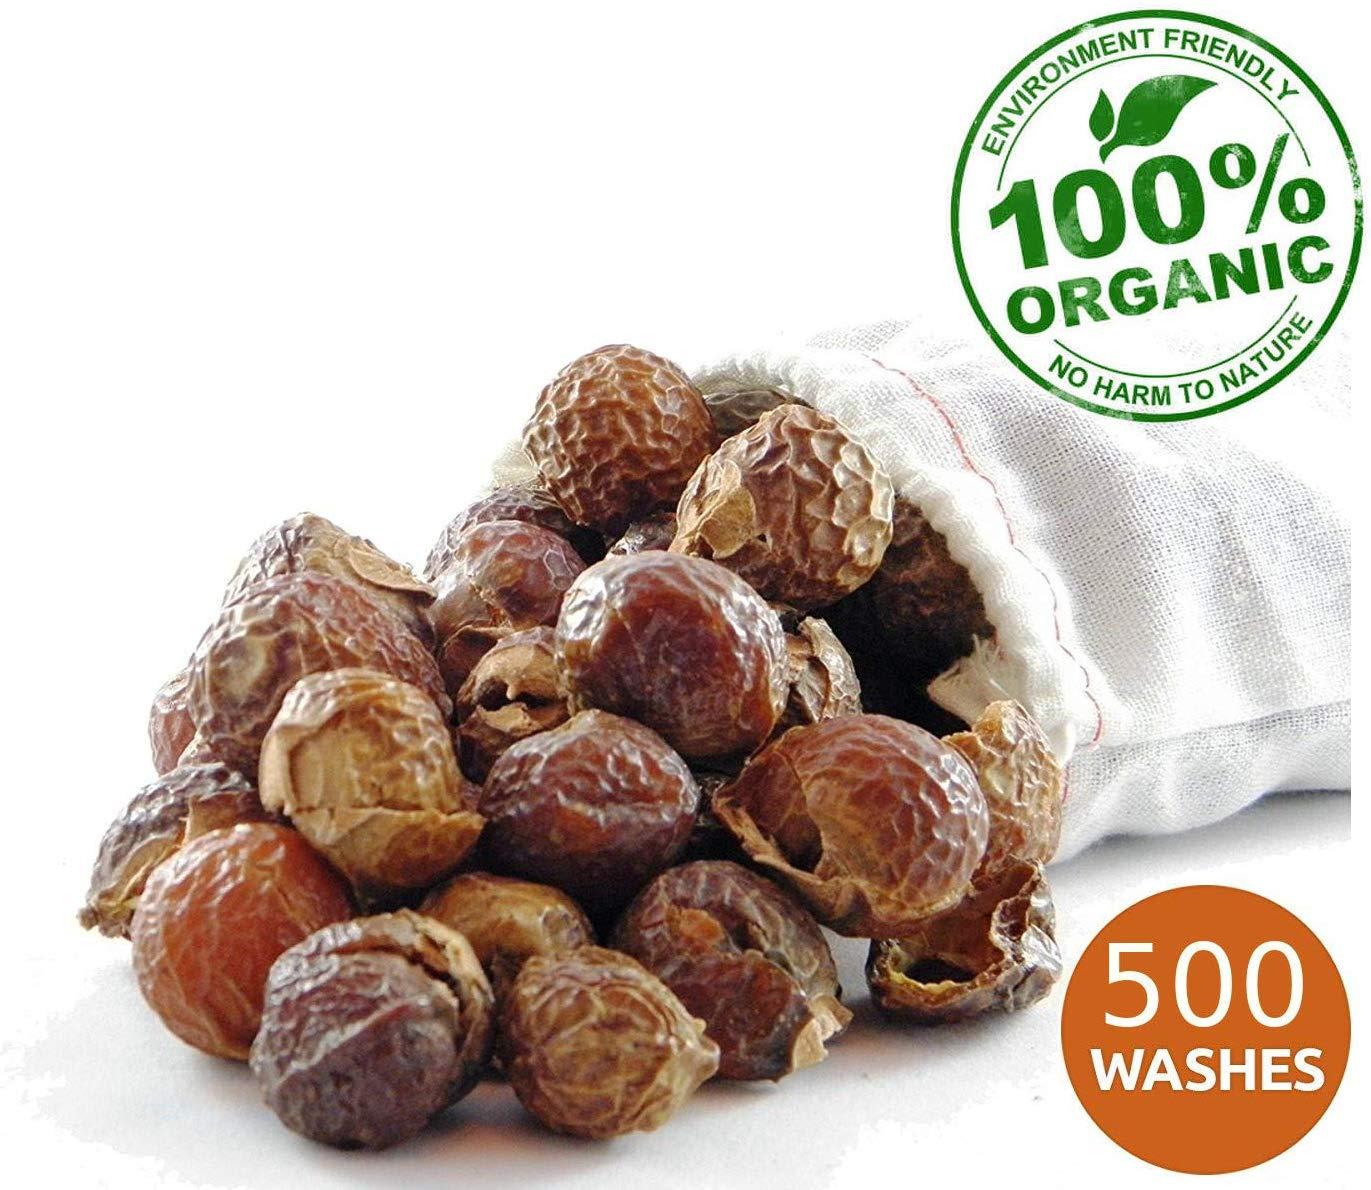 Premium Himalayan Soapnuts: Natural Laundry Detergent, Dishwashing Soap - Natural Organic Products from Auroville